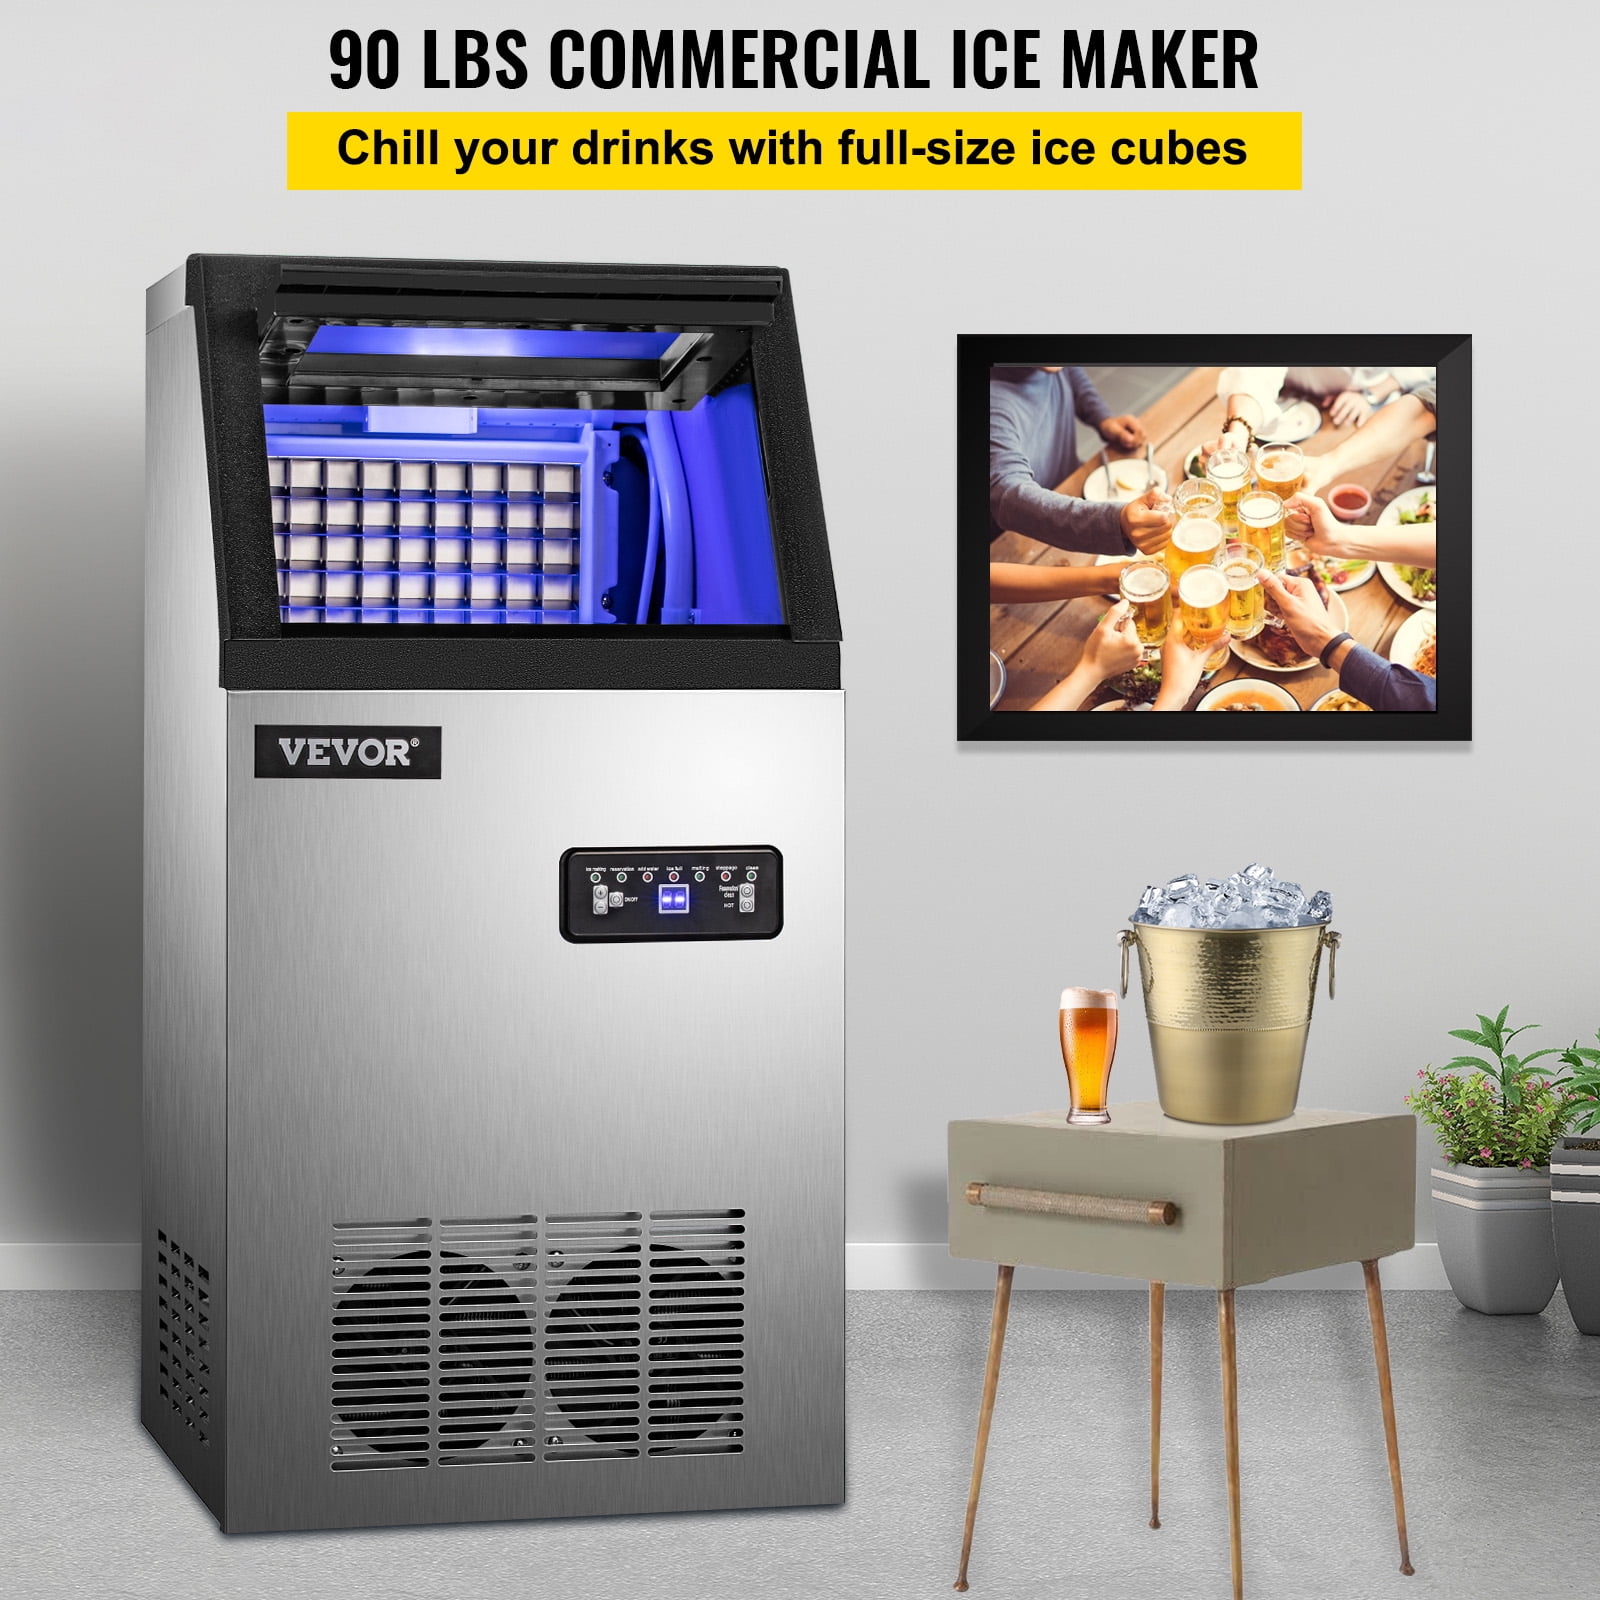 Coollife Commercial Ice Maker - Produces 100lbs of Ice in 24 Hrs with 33lbs Storage Bin(100LBS/24H)